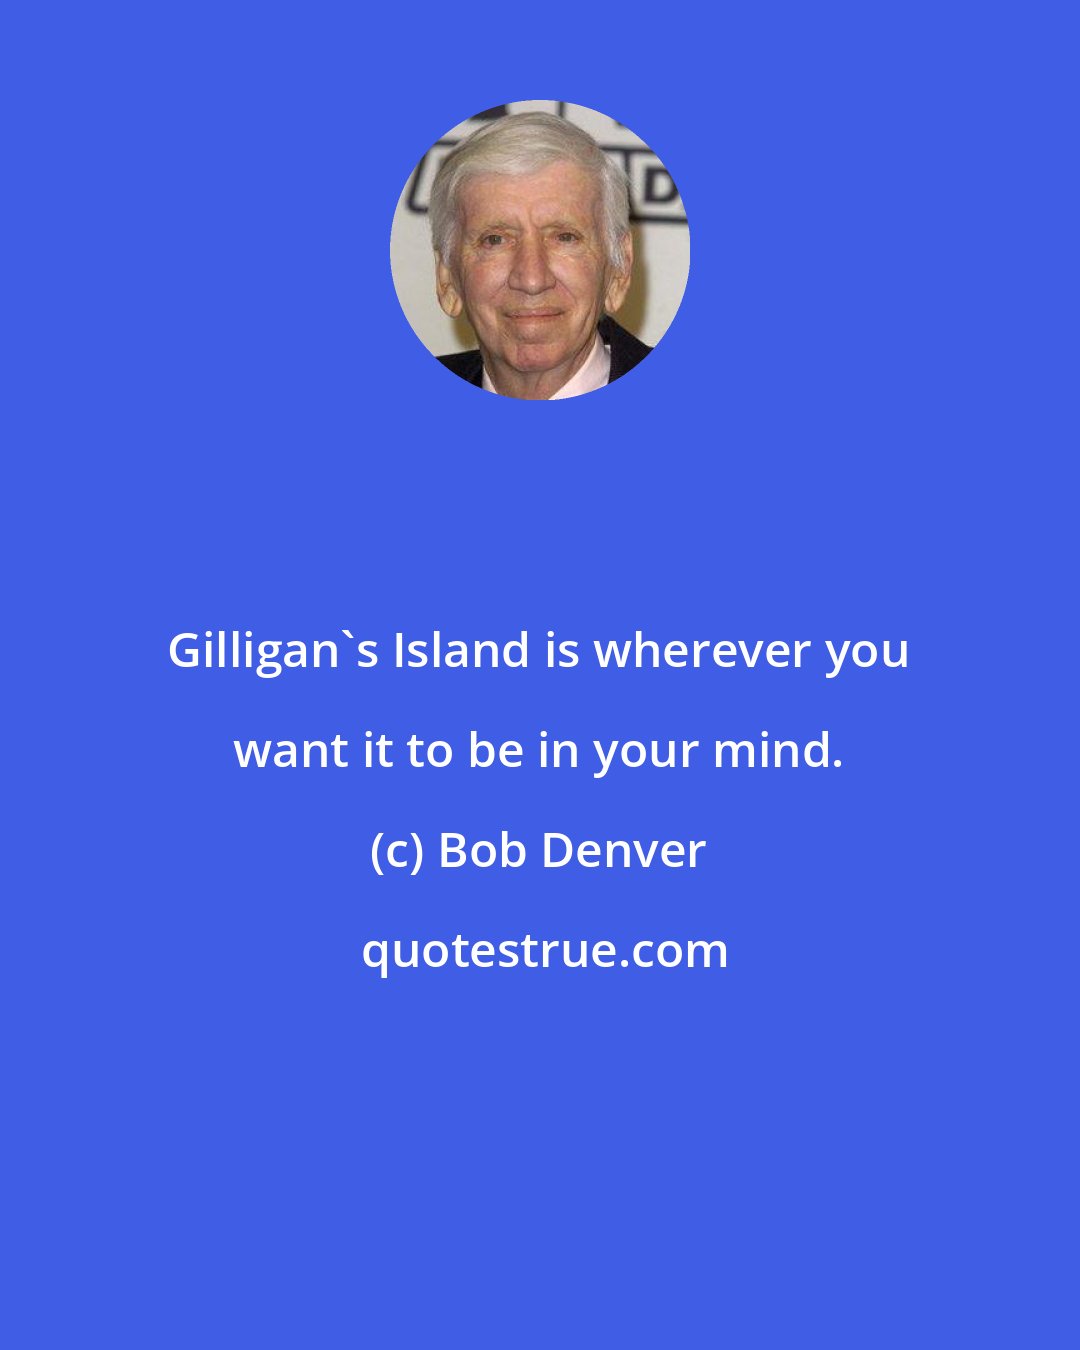 Bob Denver: Gilligan's Island is wherever you want it to be in your mind.